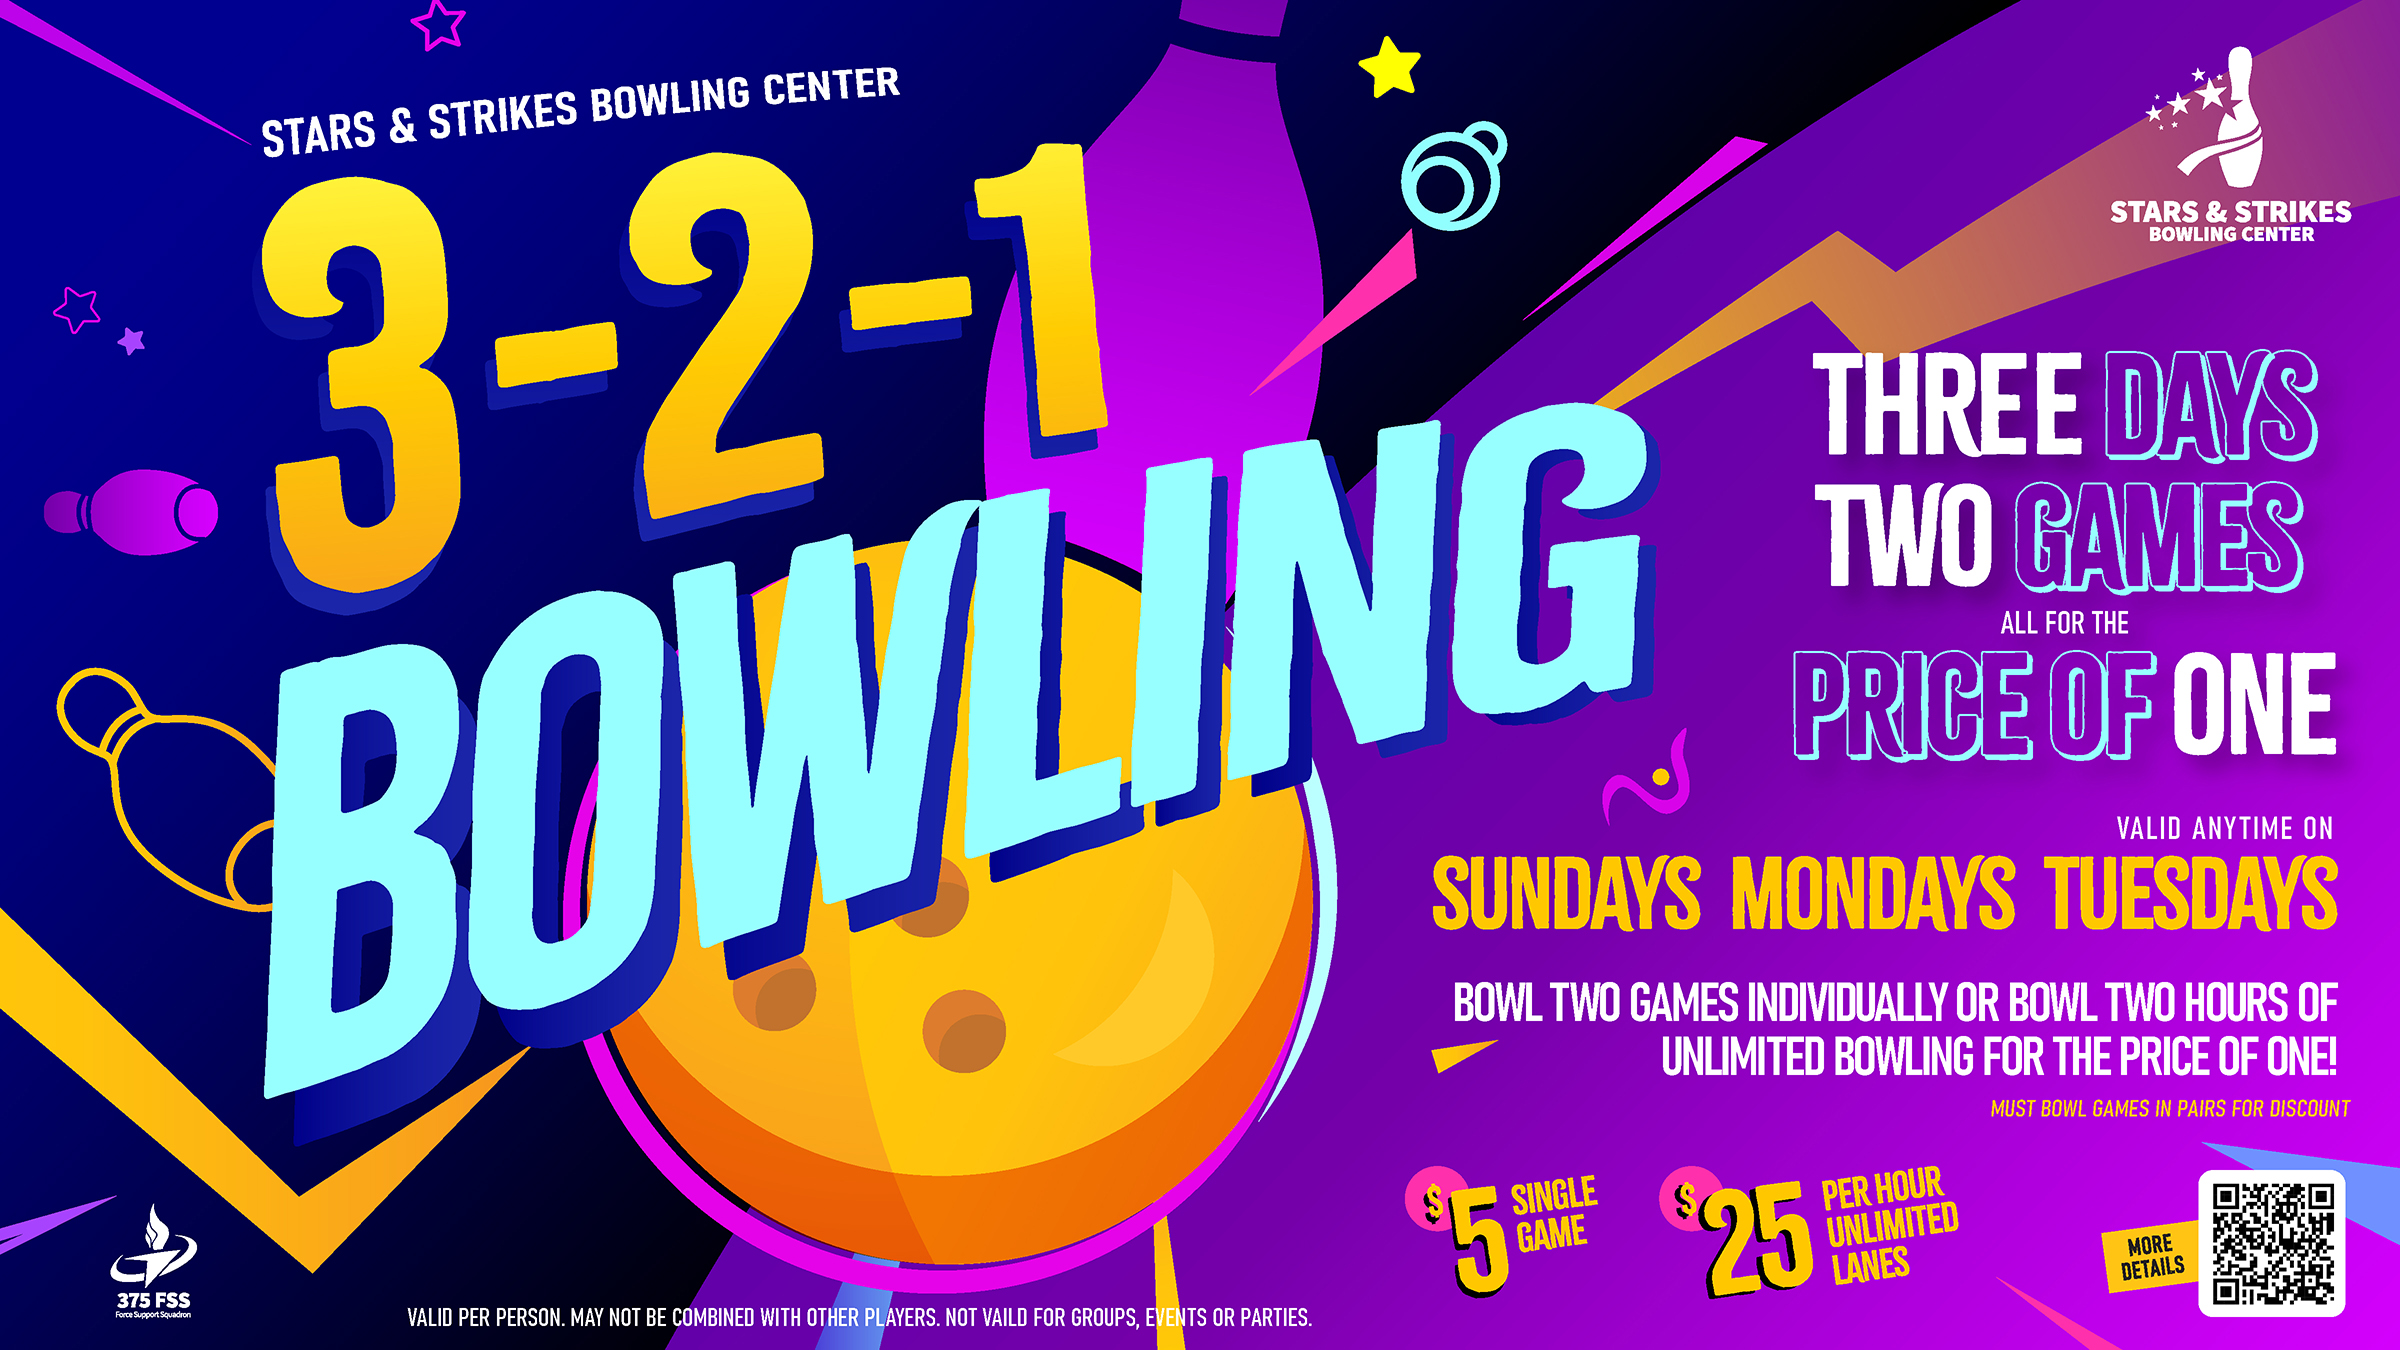 Bowling Lane Price: Strike a Deal on Your Next Game!